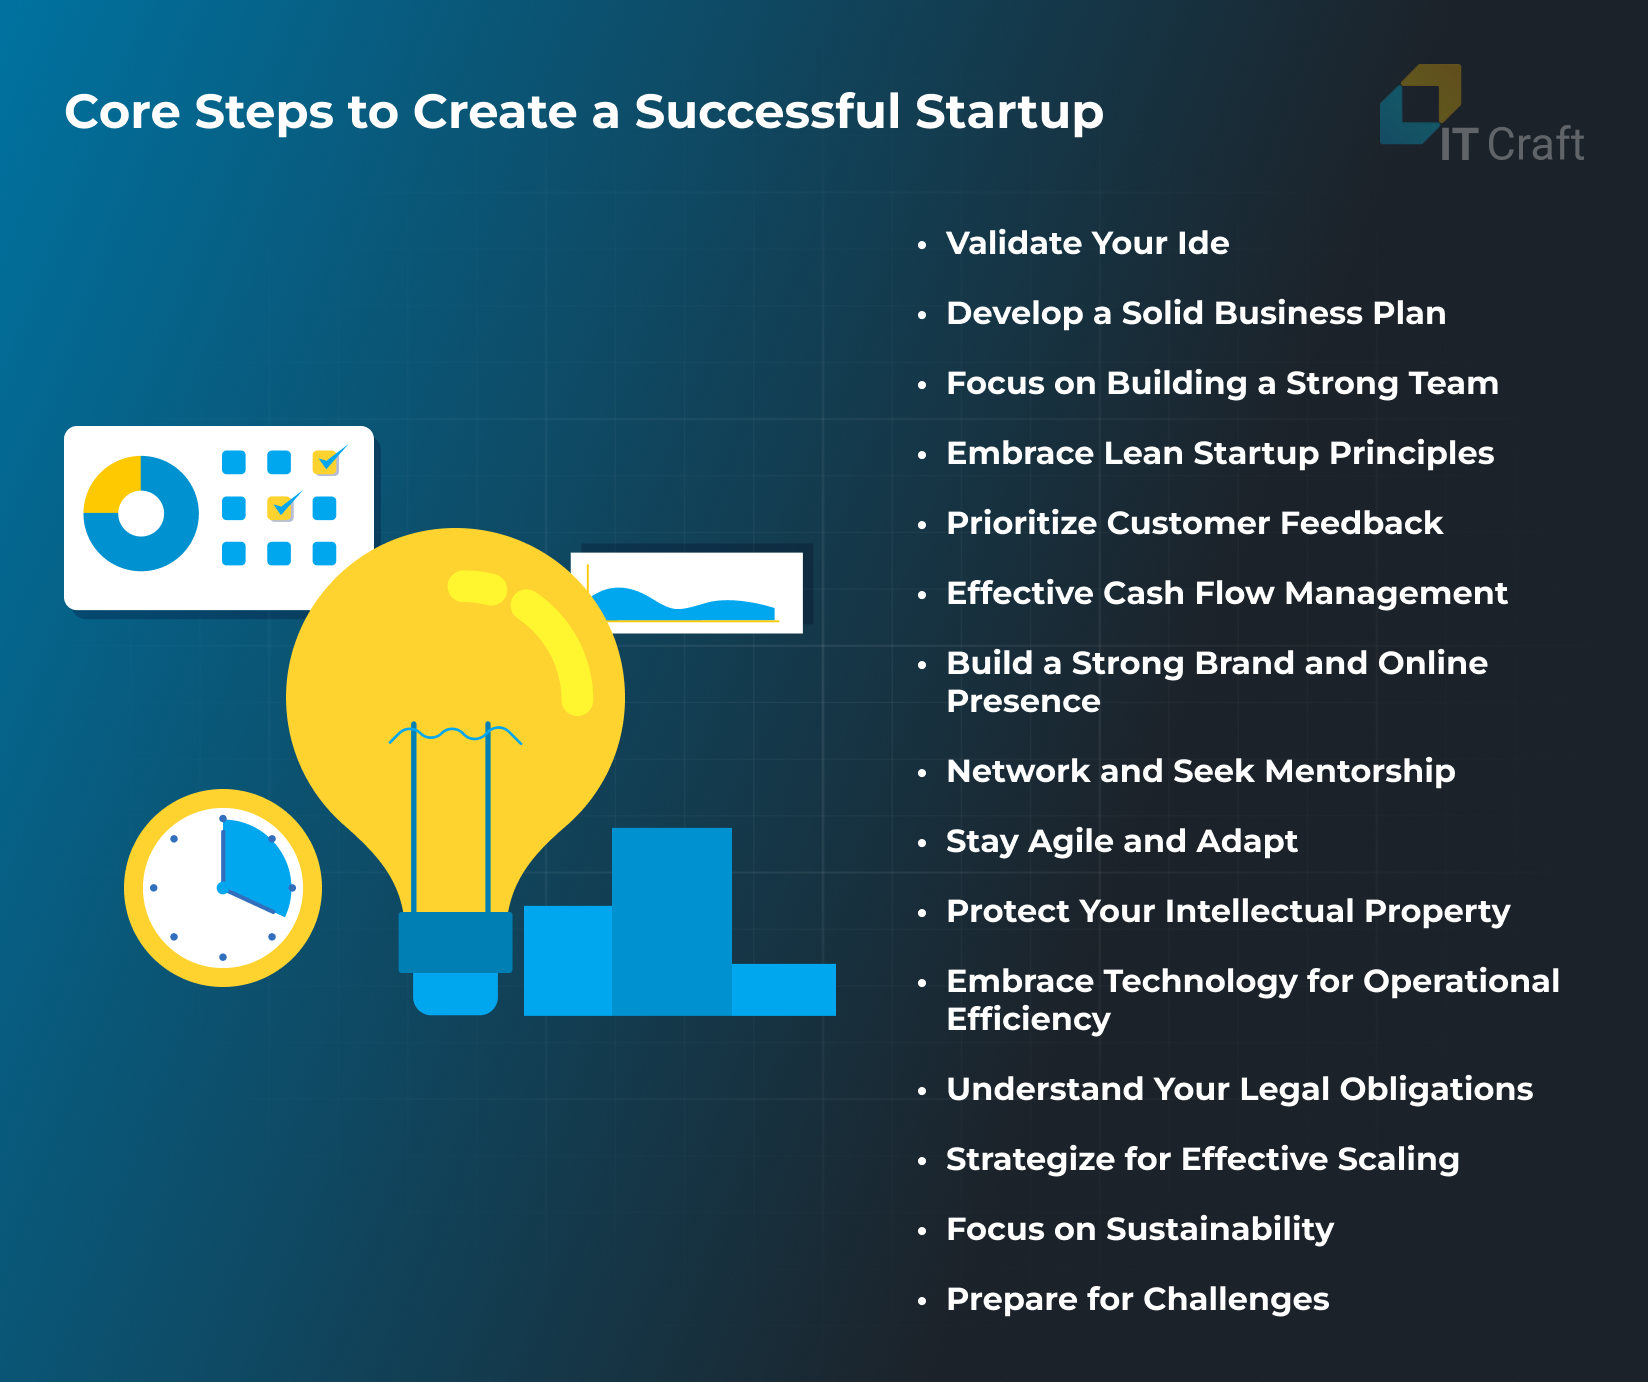 Tips for Making a Successful Startup